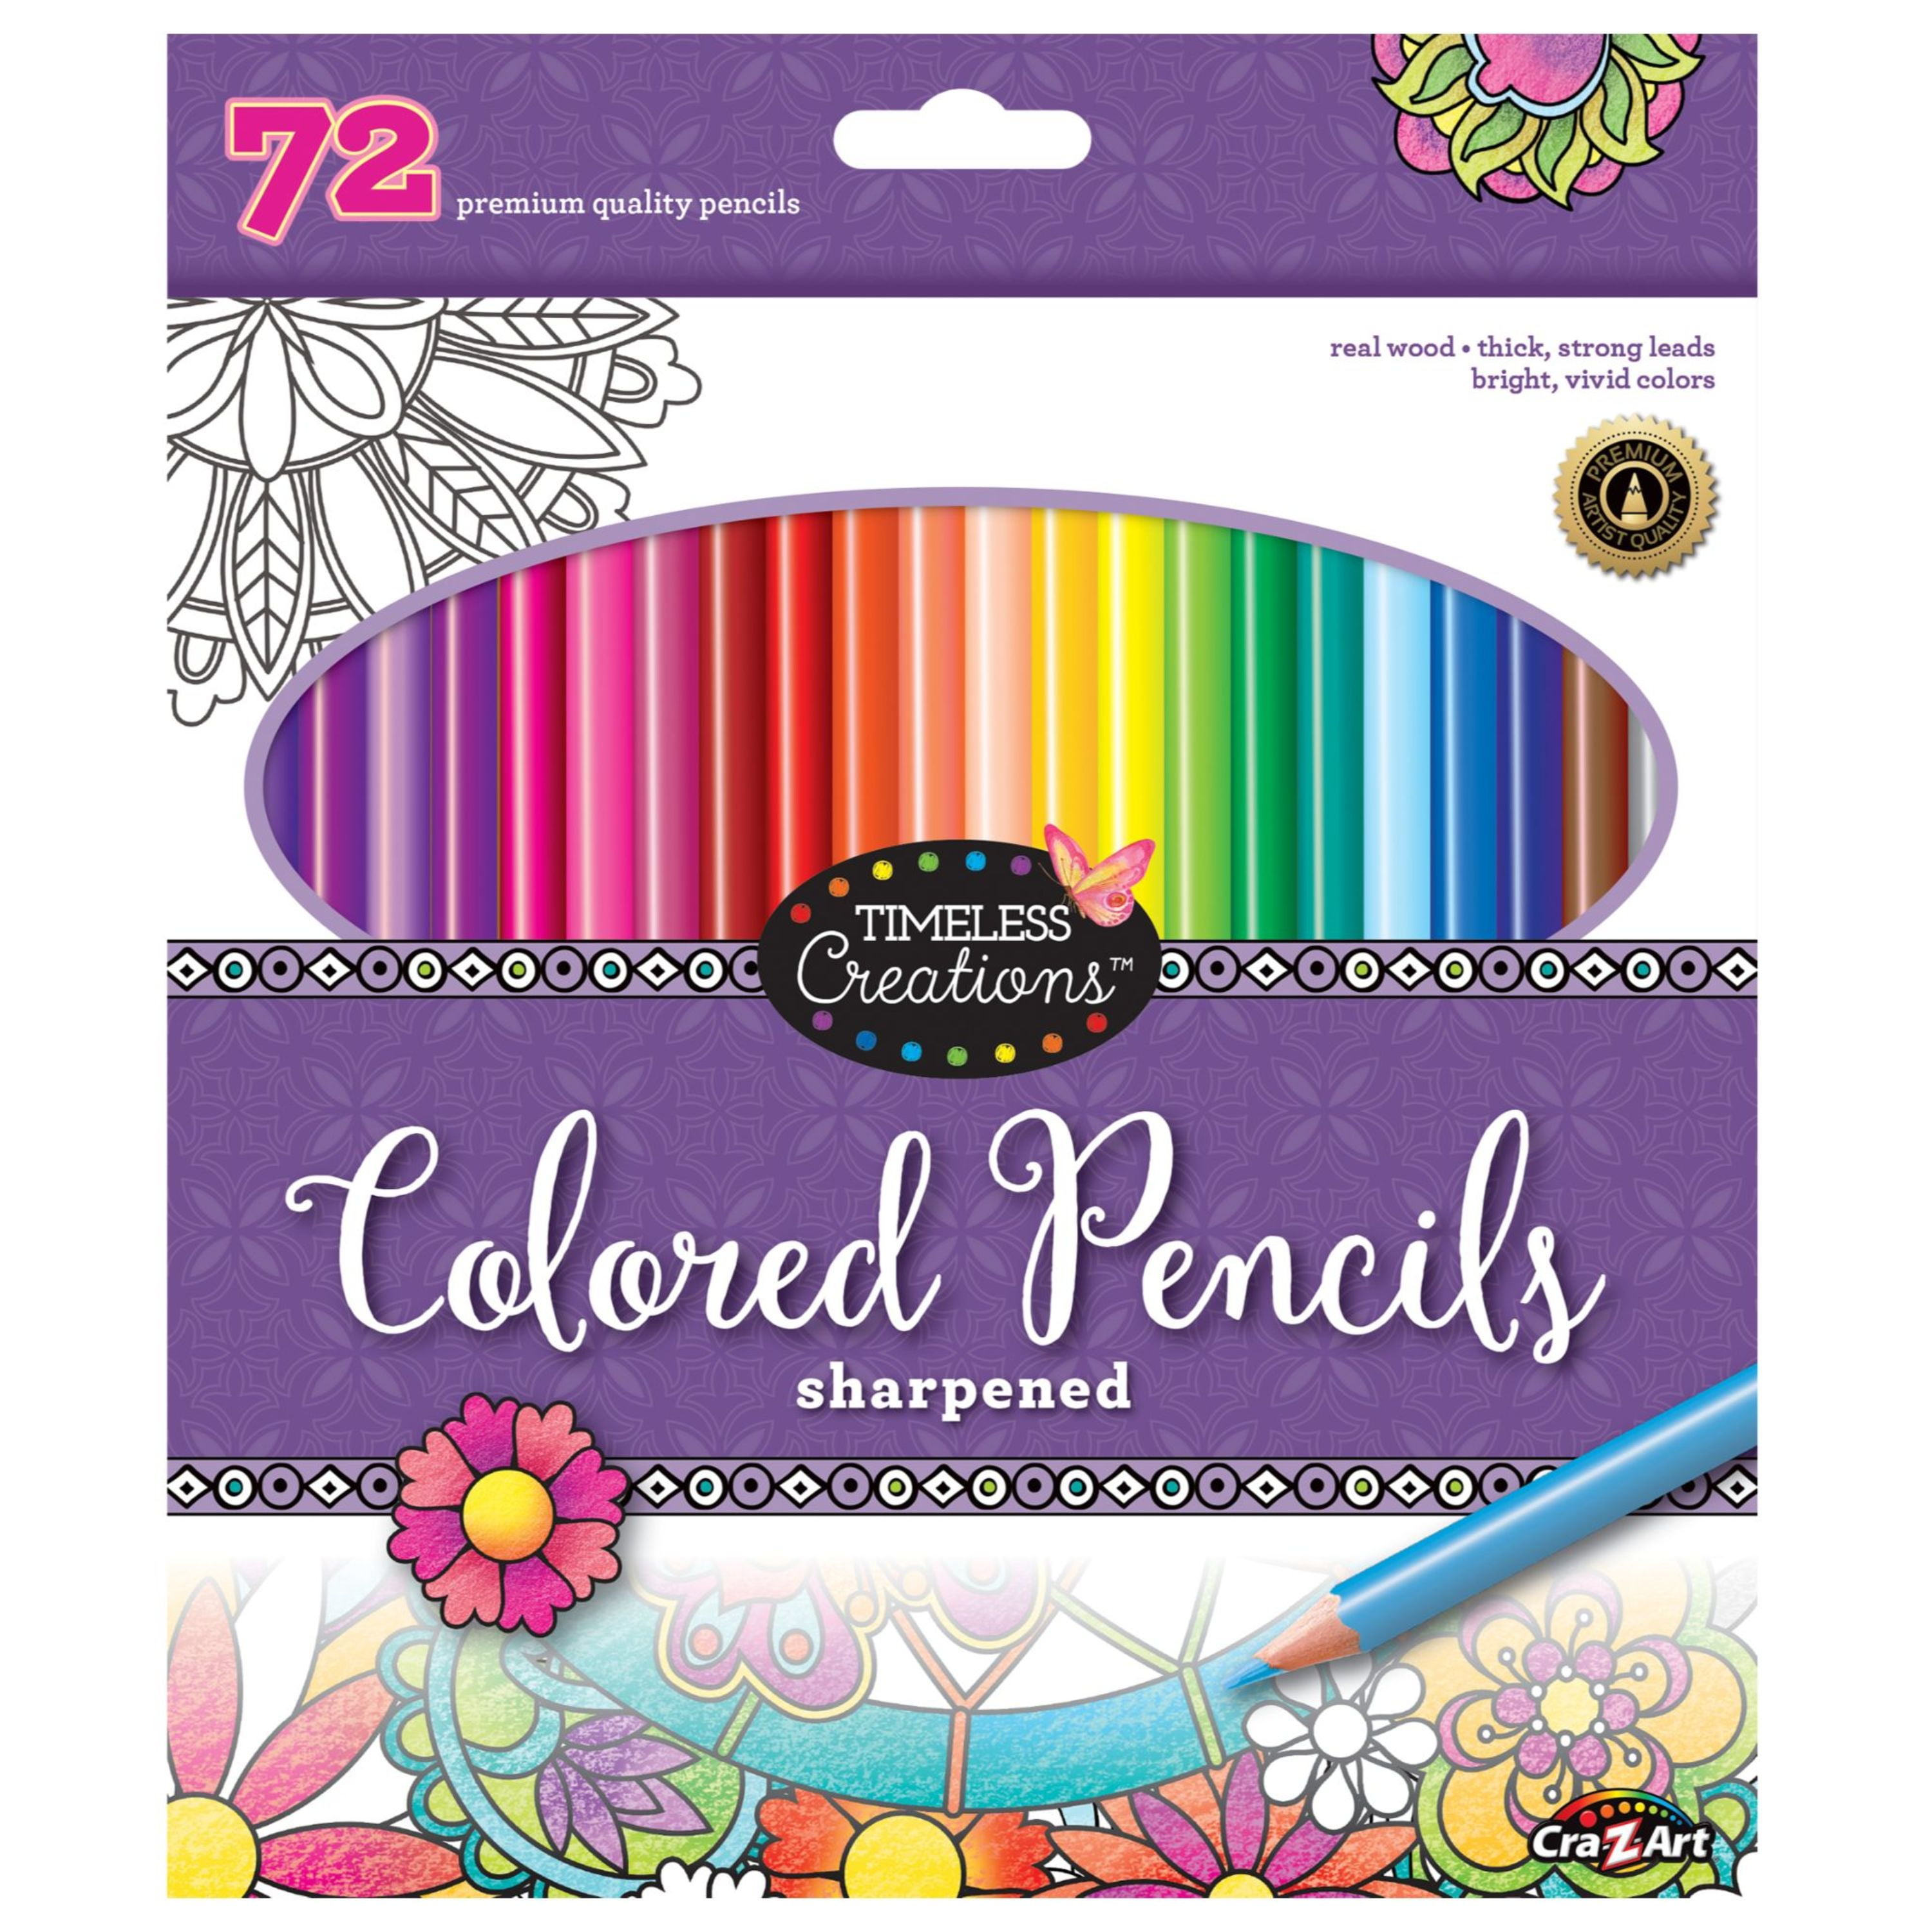 Swatch Form: Cra-z-art Timeless Creations Colored Pencils 72pc. (Instant  Download) 